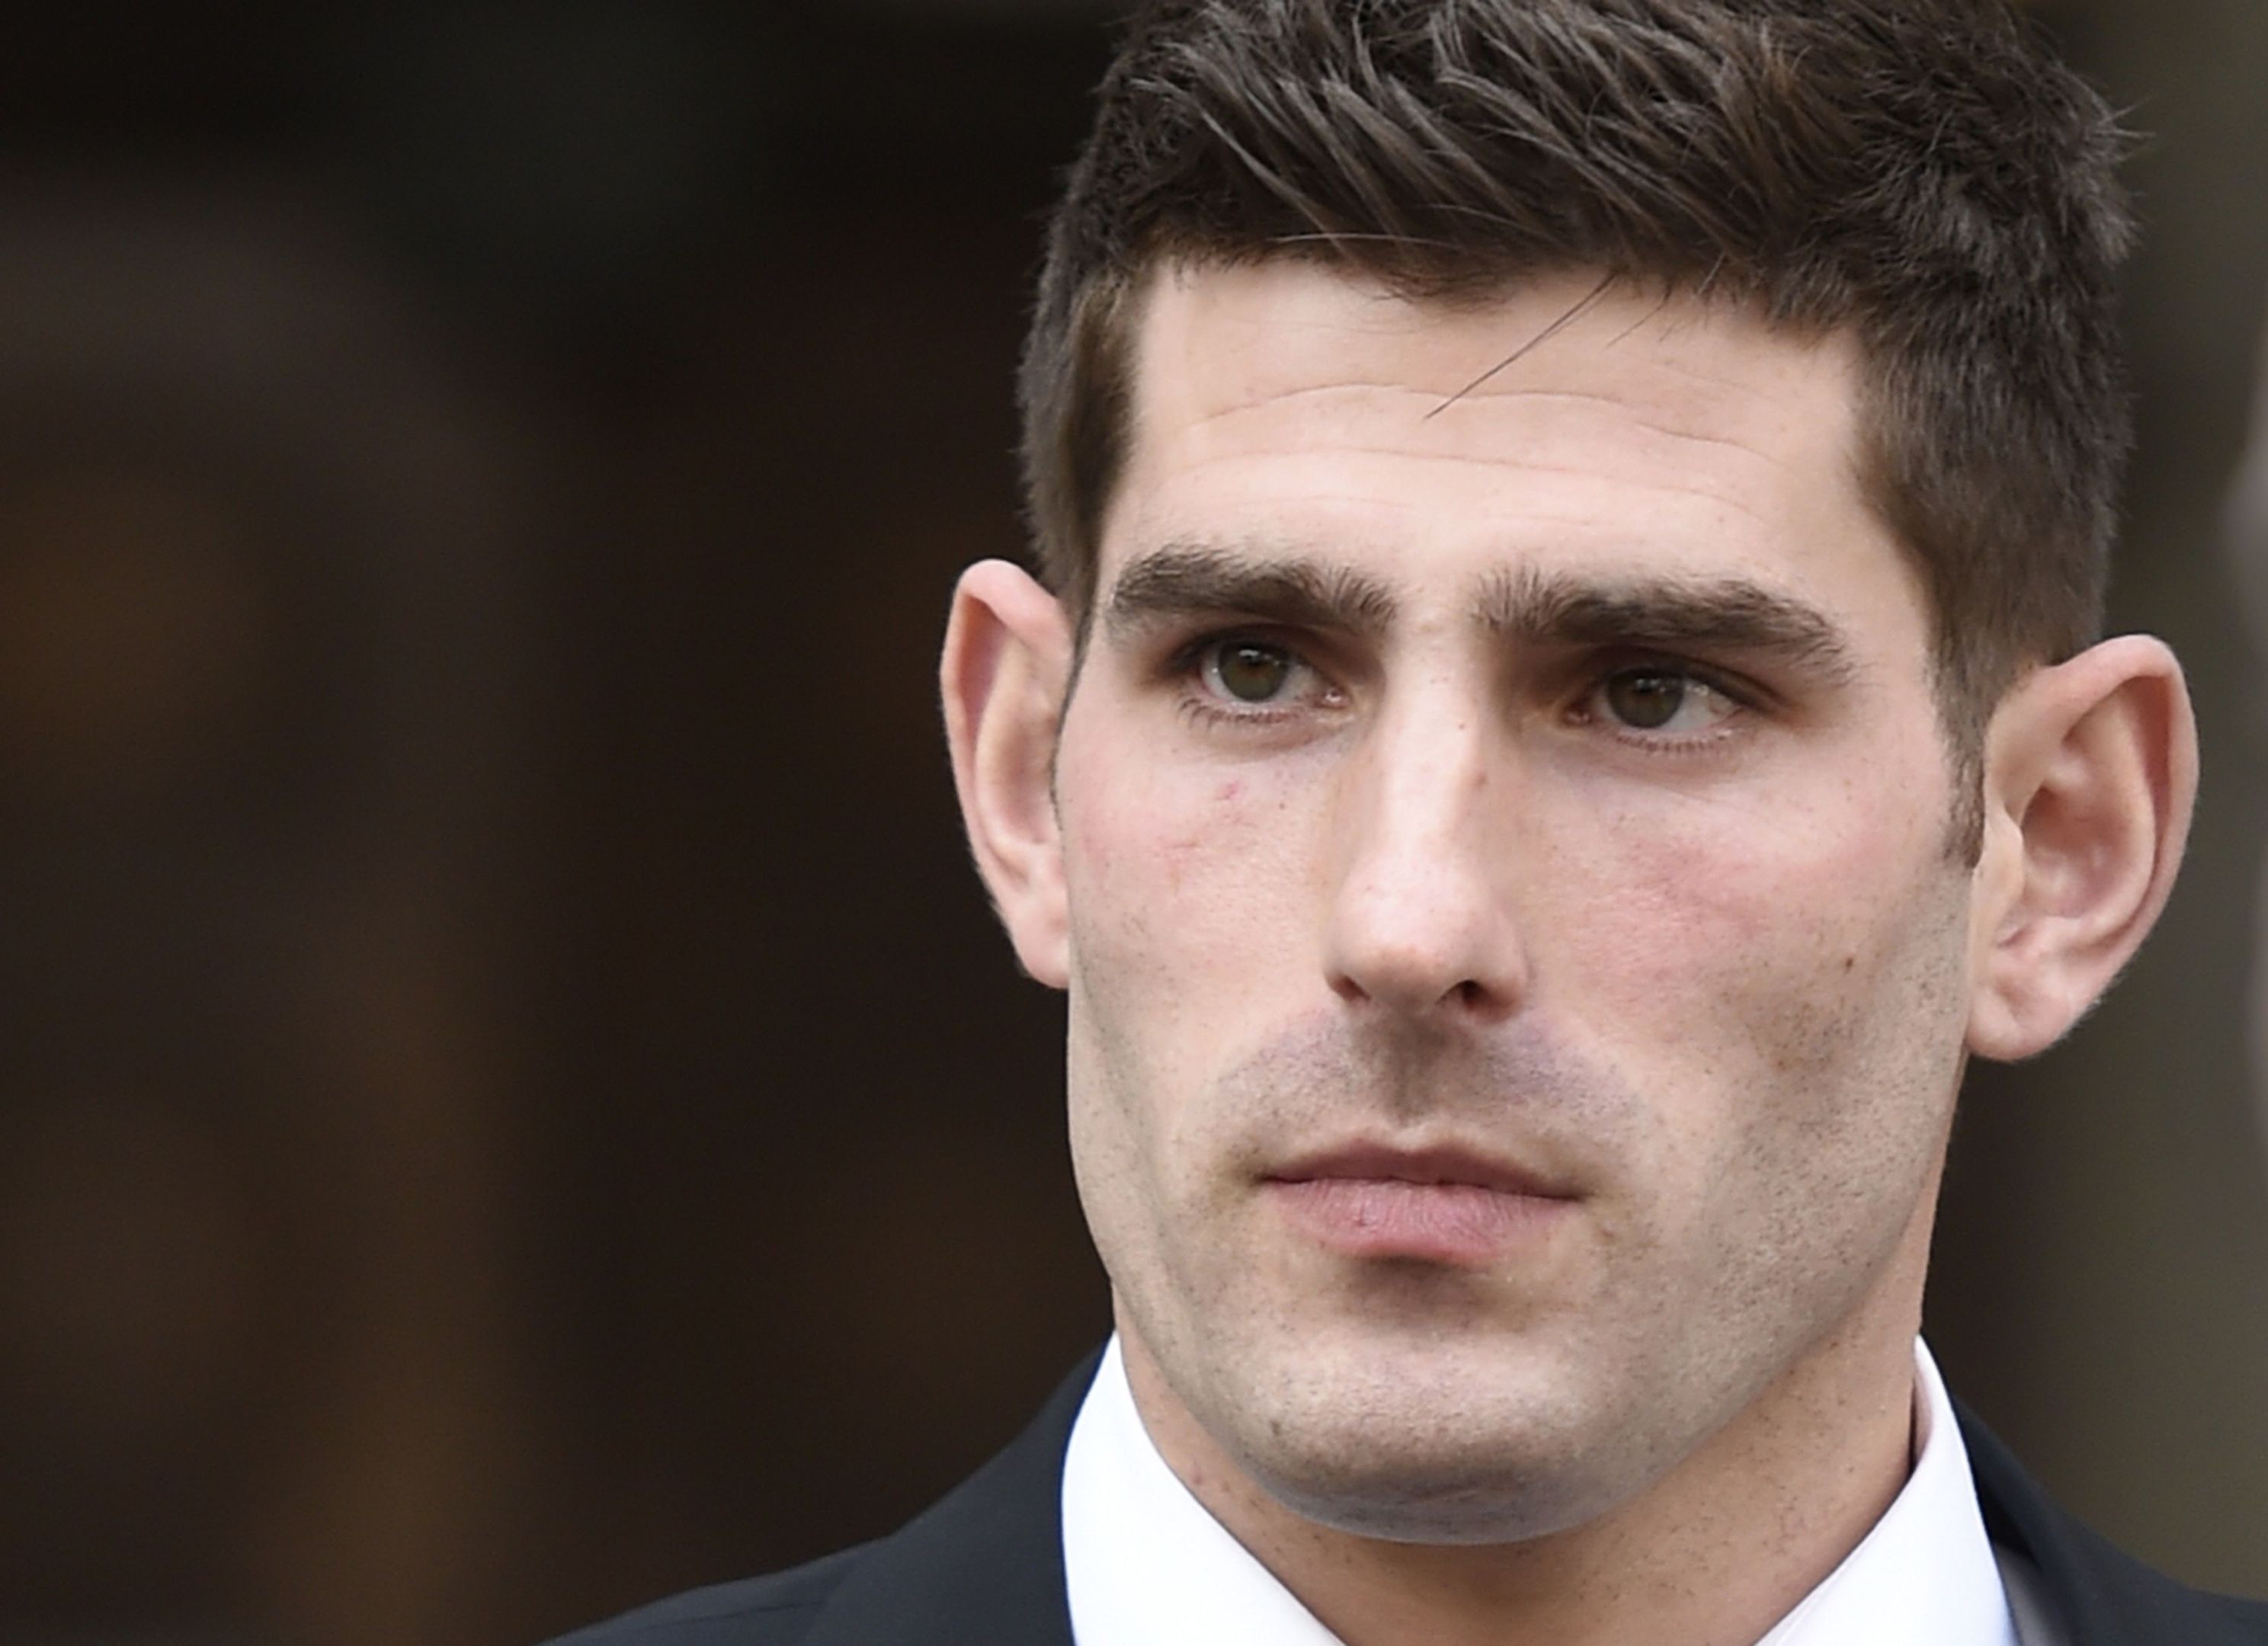 Ched Evans.